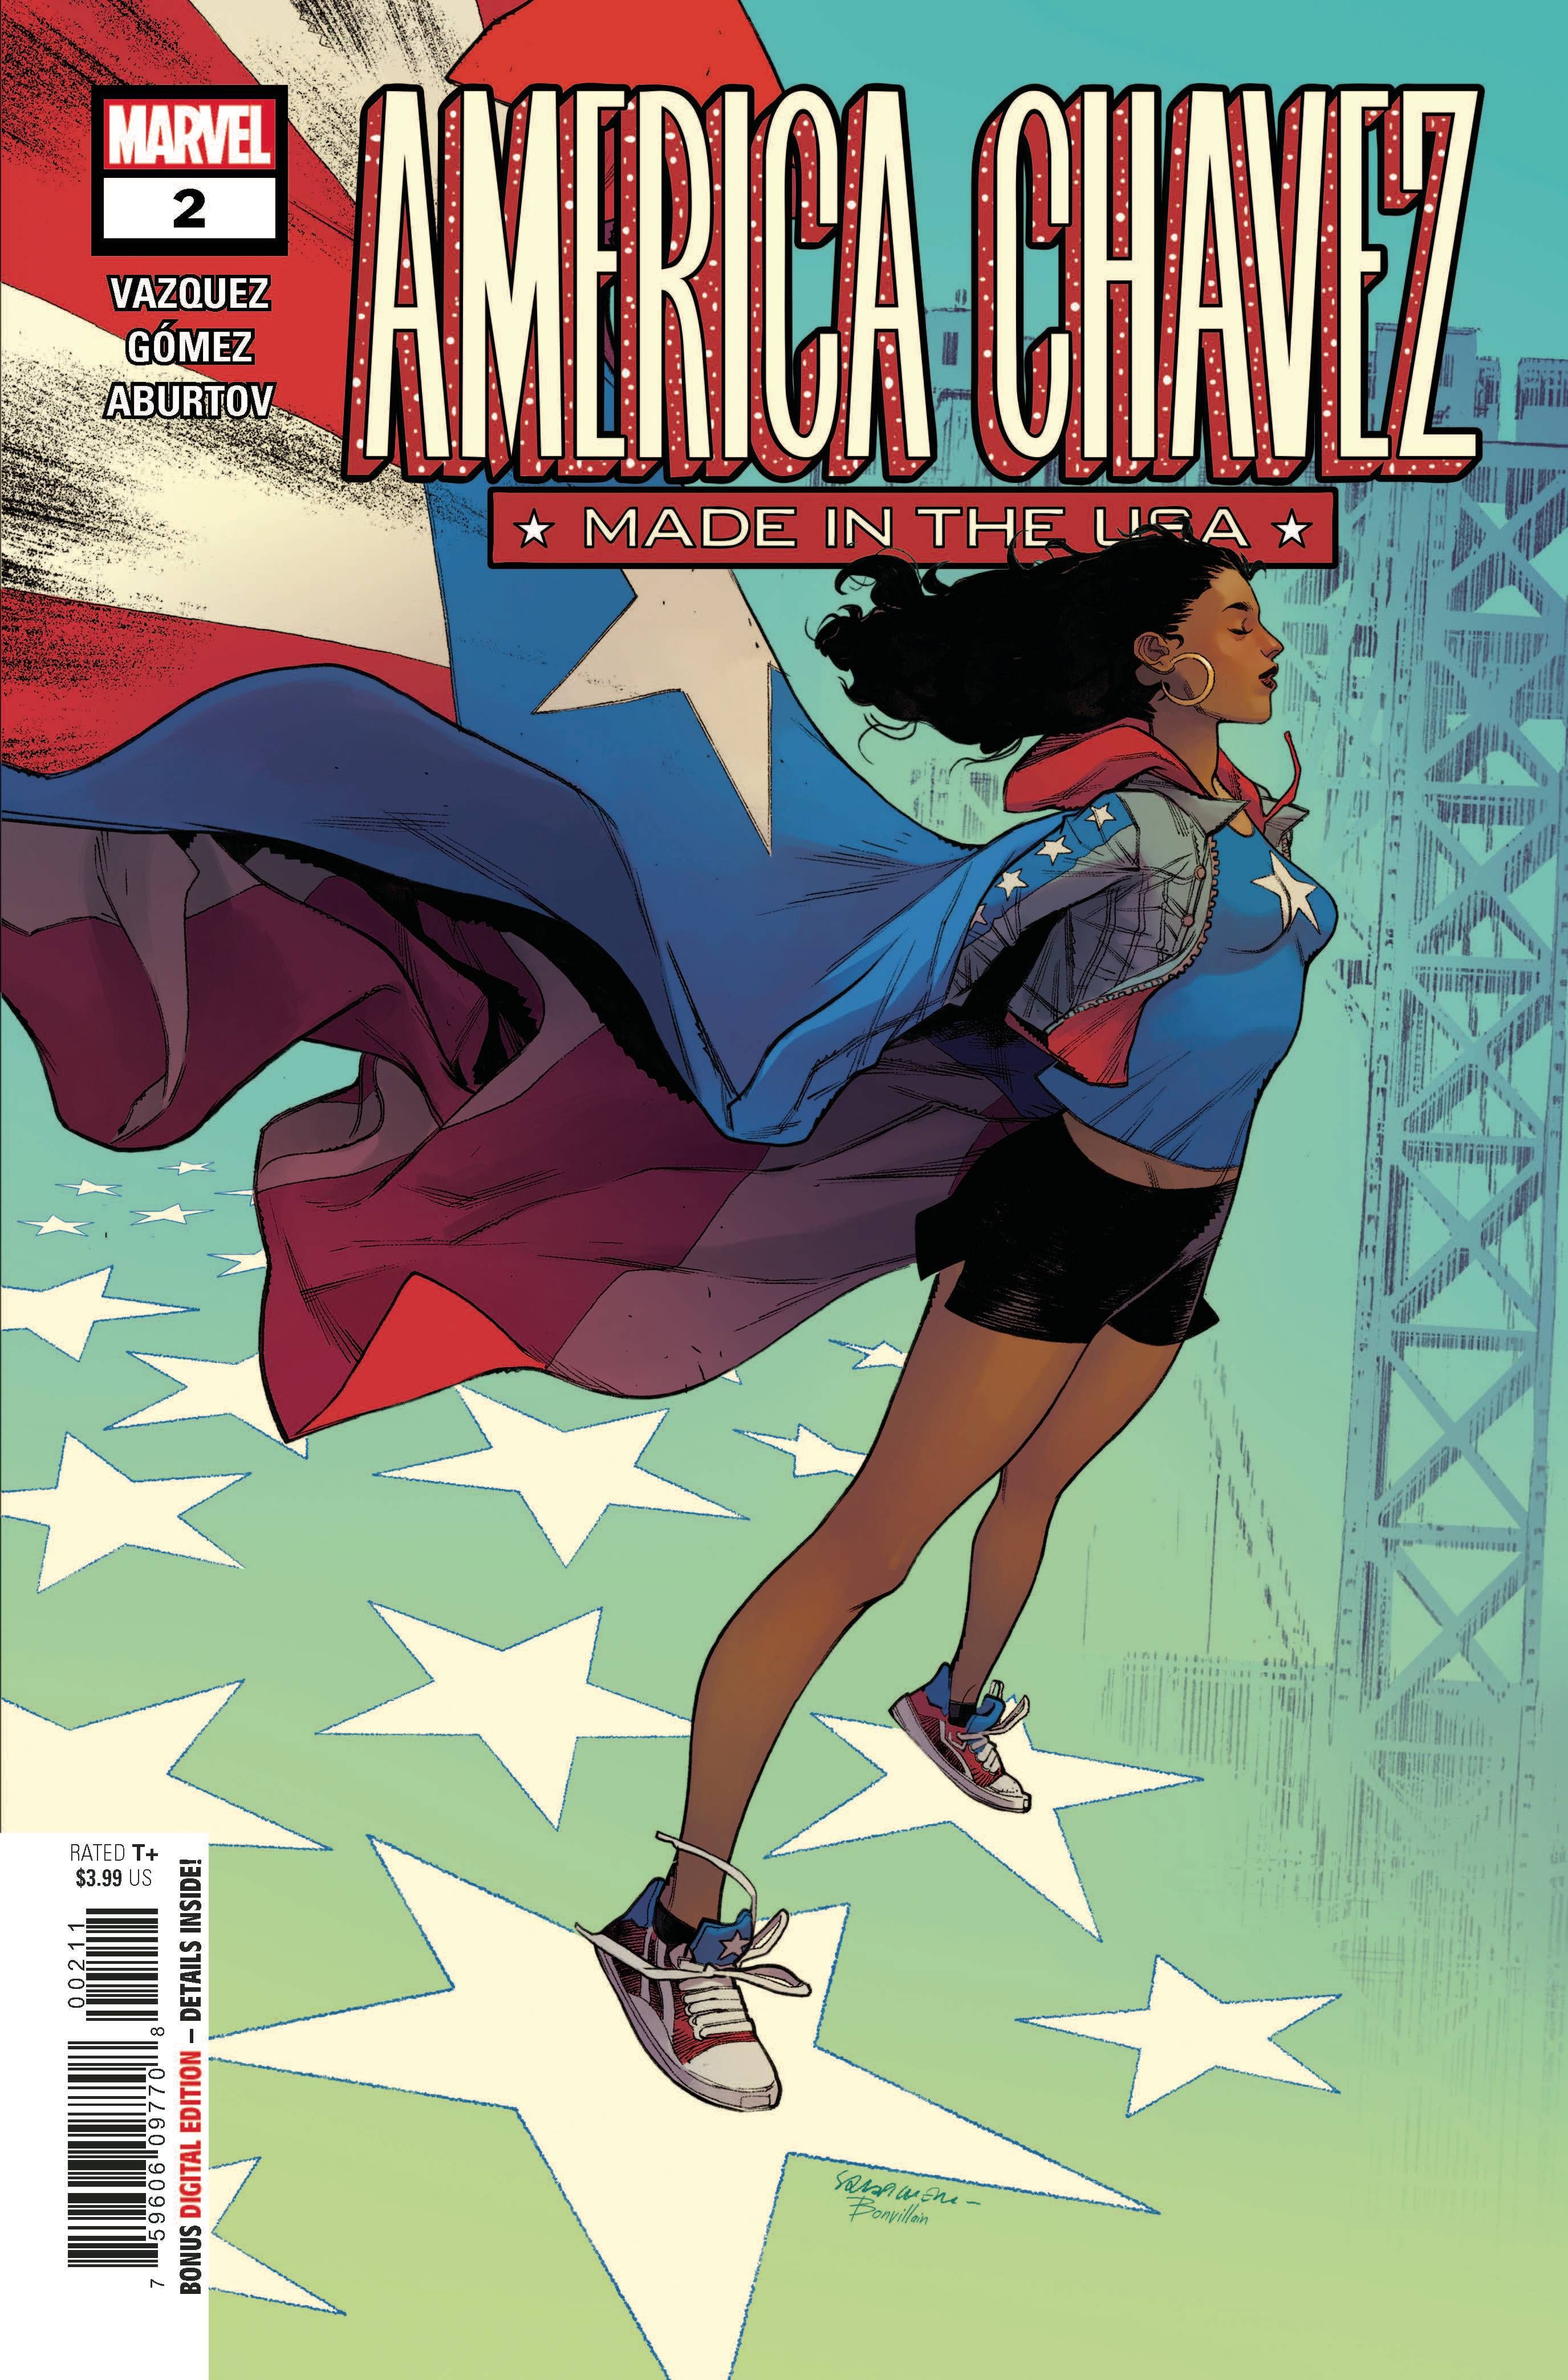 America Chavez Made In Usa #2 Comic